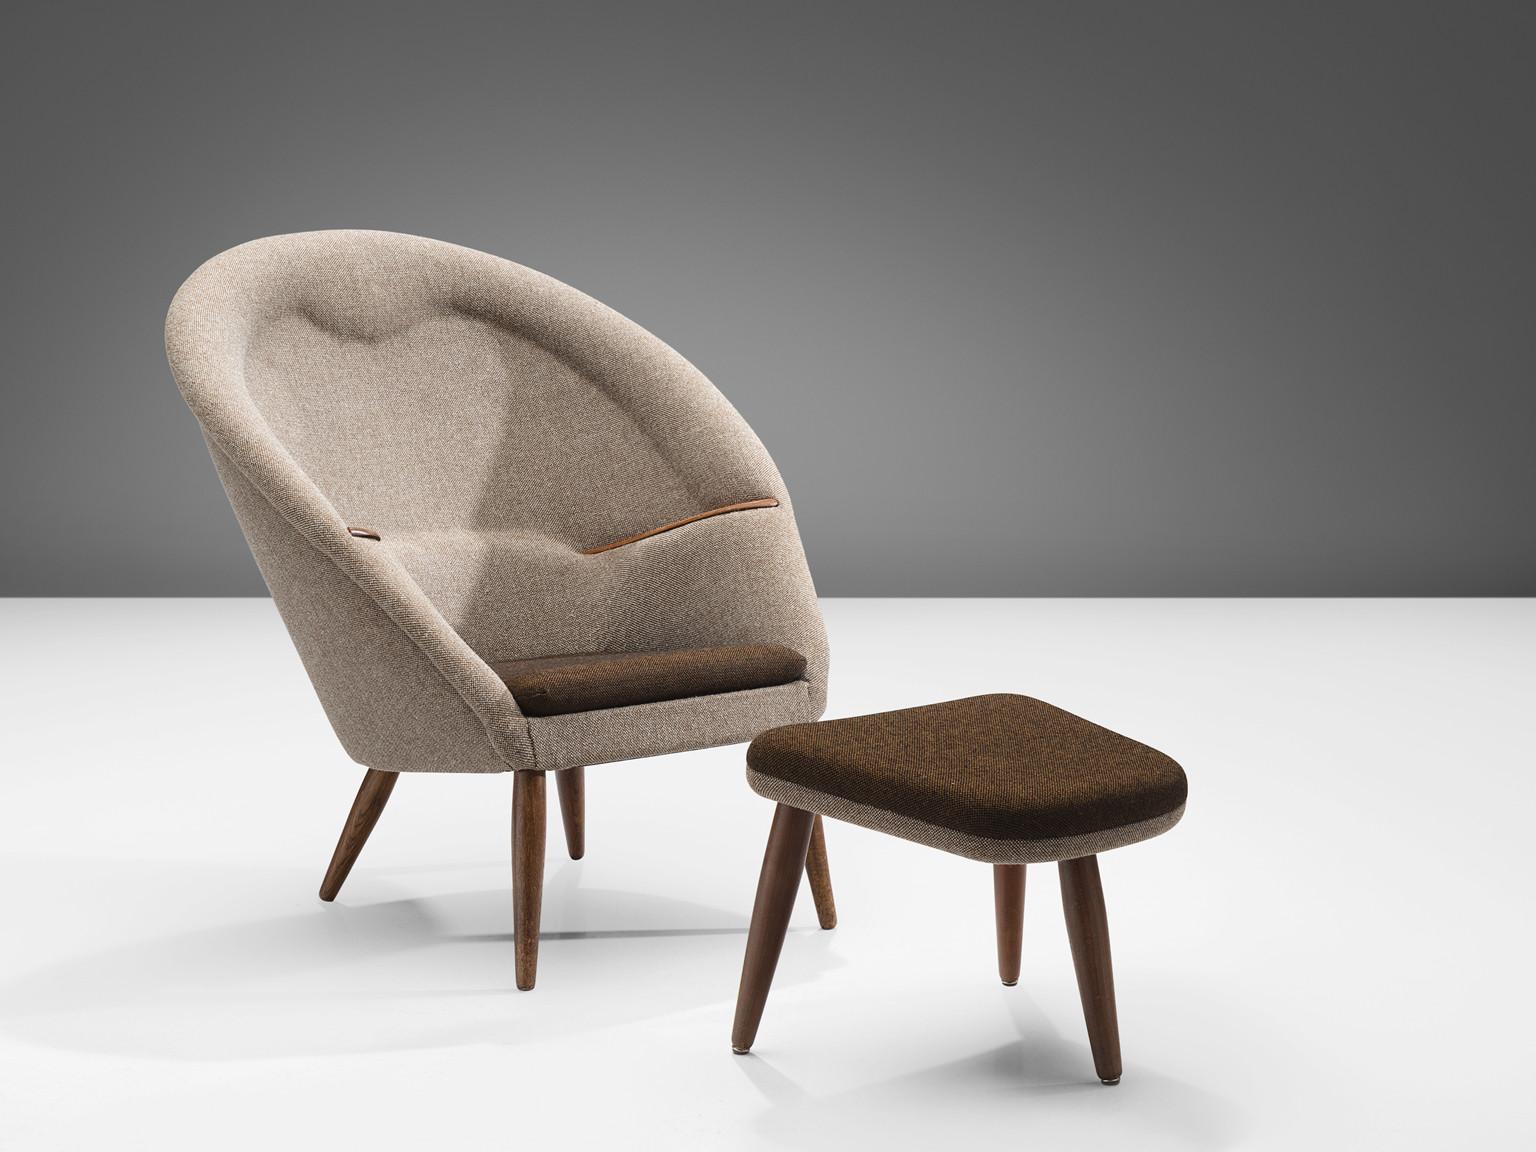 Arnold Madsen for Madsen & Schubell, 'Oda' lounge chair with ottoman, model 'MS-9', fabric teak, Denmark, circa 1957. 

The Oda lounge chair with ottoman, designed by Arnold Madsen (1907-1989) for Madsen & Schubell, exudes both style and comfort.